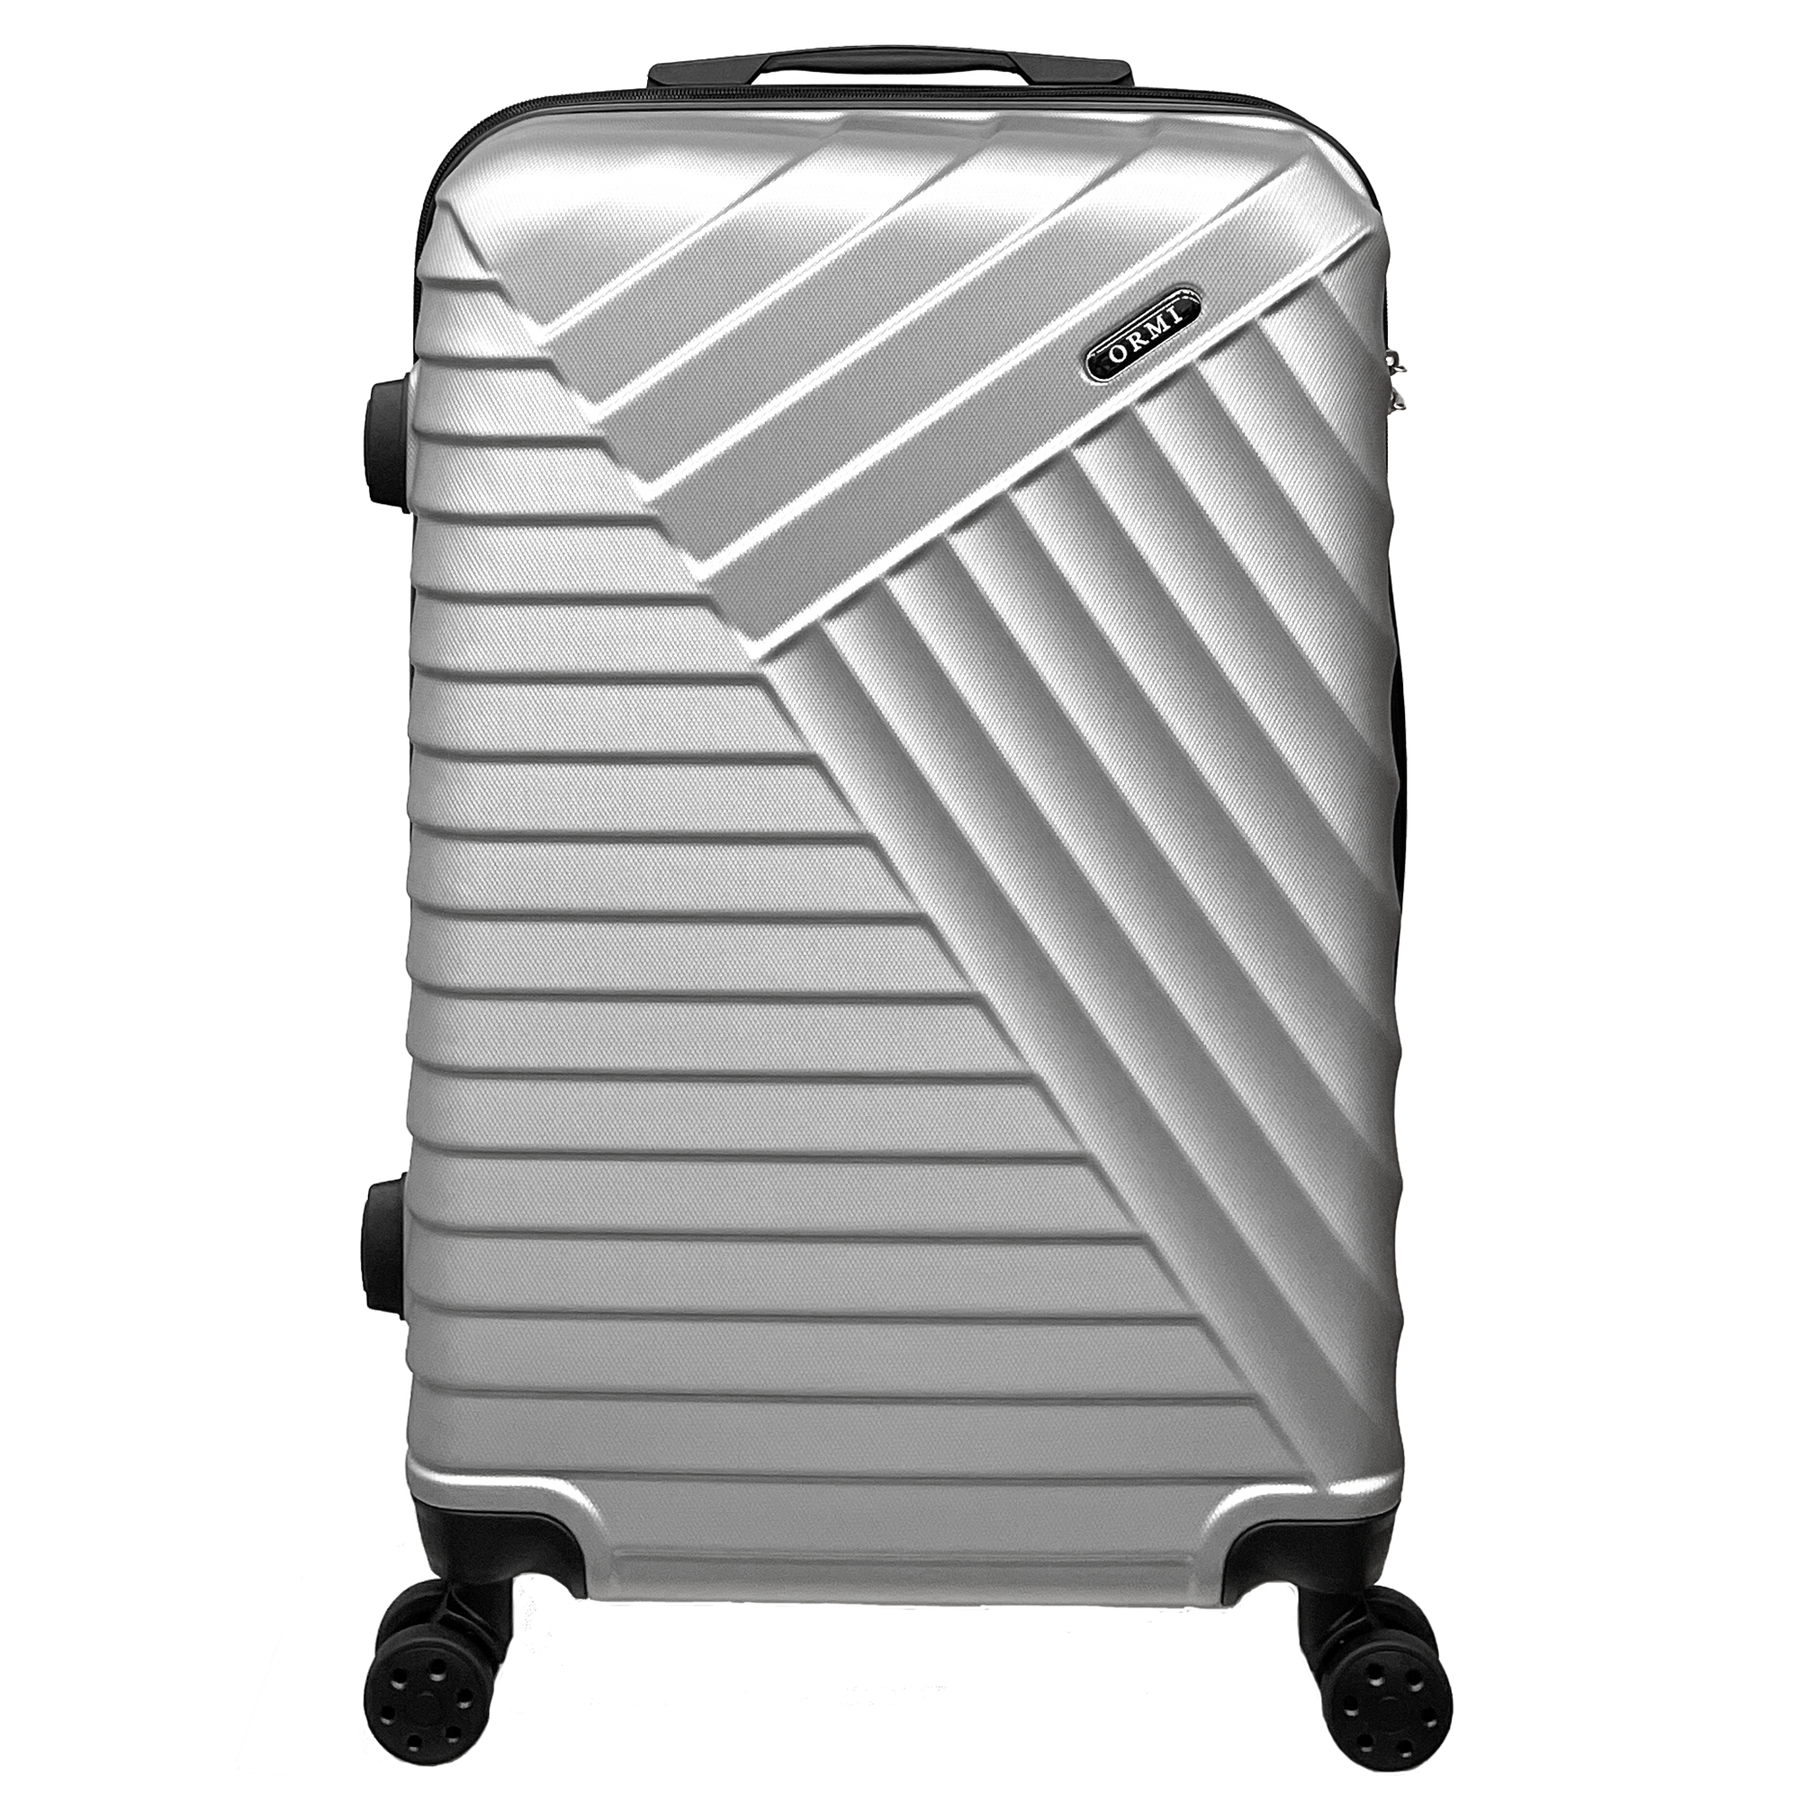 Medium-sized suitcase by STSHLine in sturdy ABS, dimensions 65x43x26 cm, with 4 double 360° wheels - Lightweight and durable